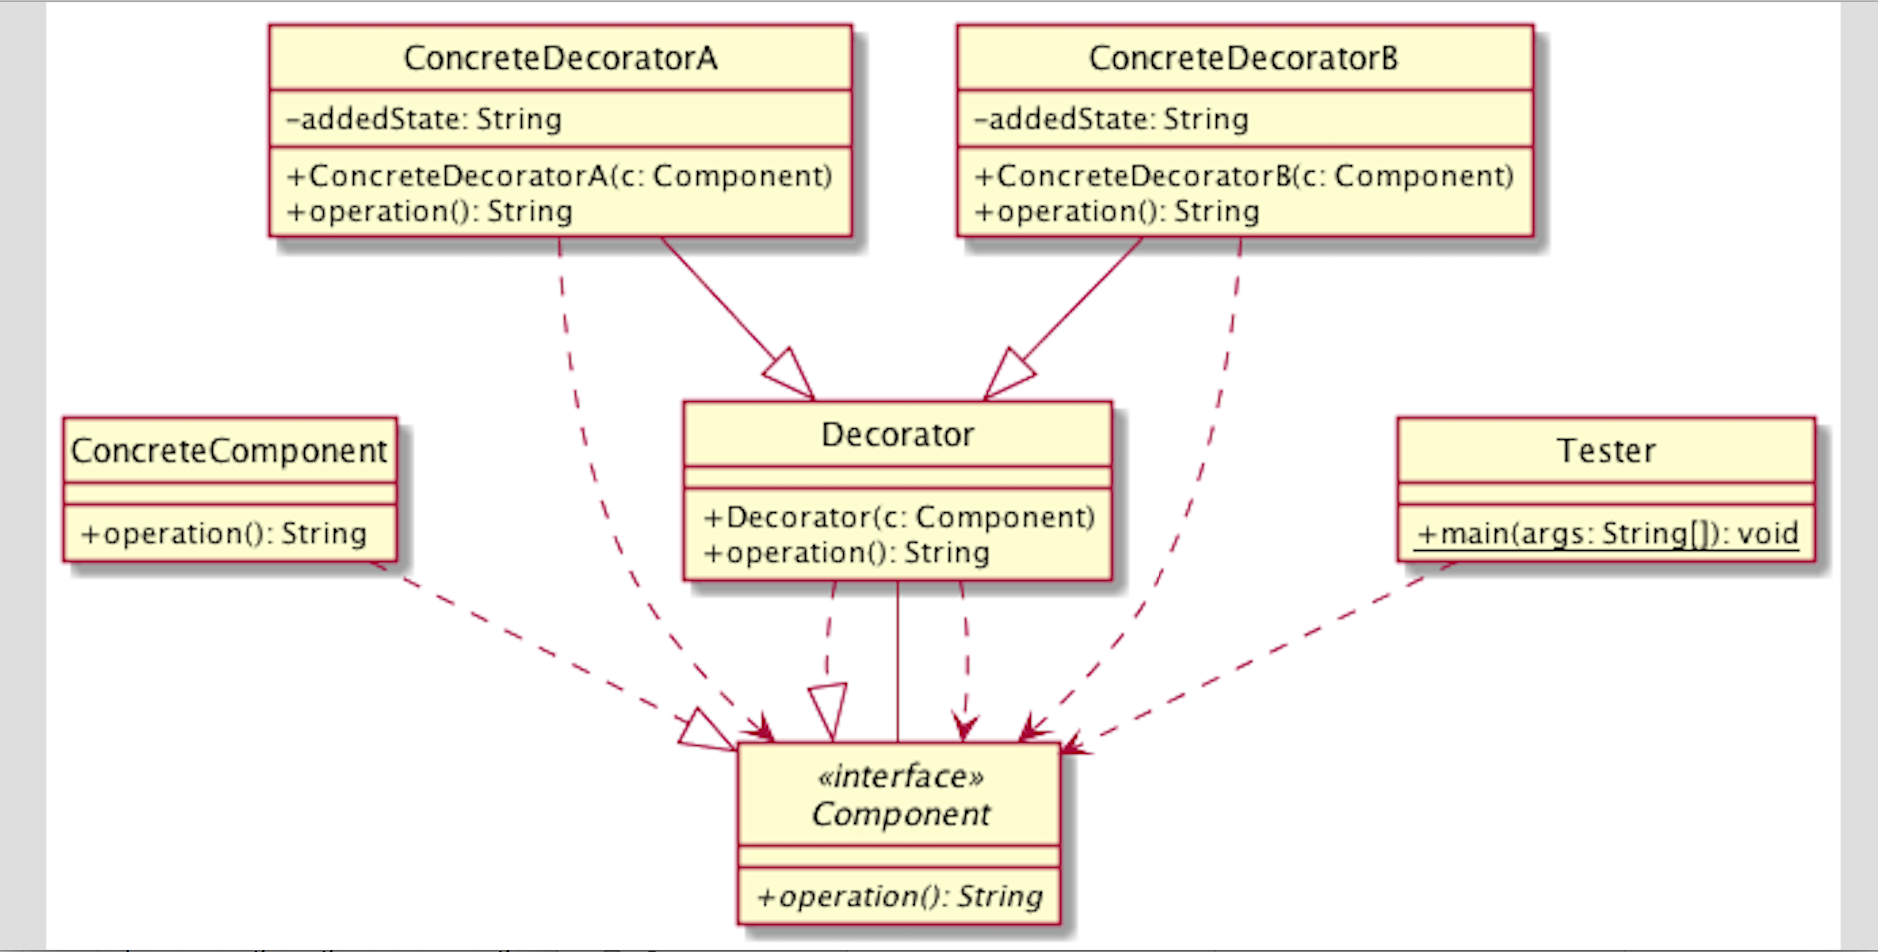 Java tools to generate UML Class and Sequence diagrams